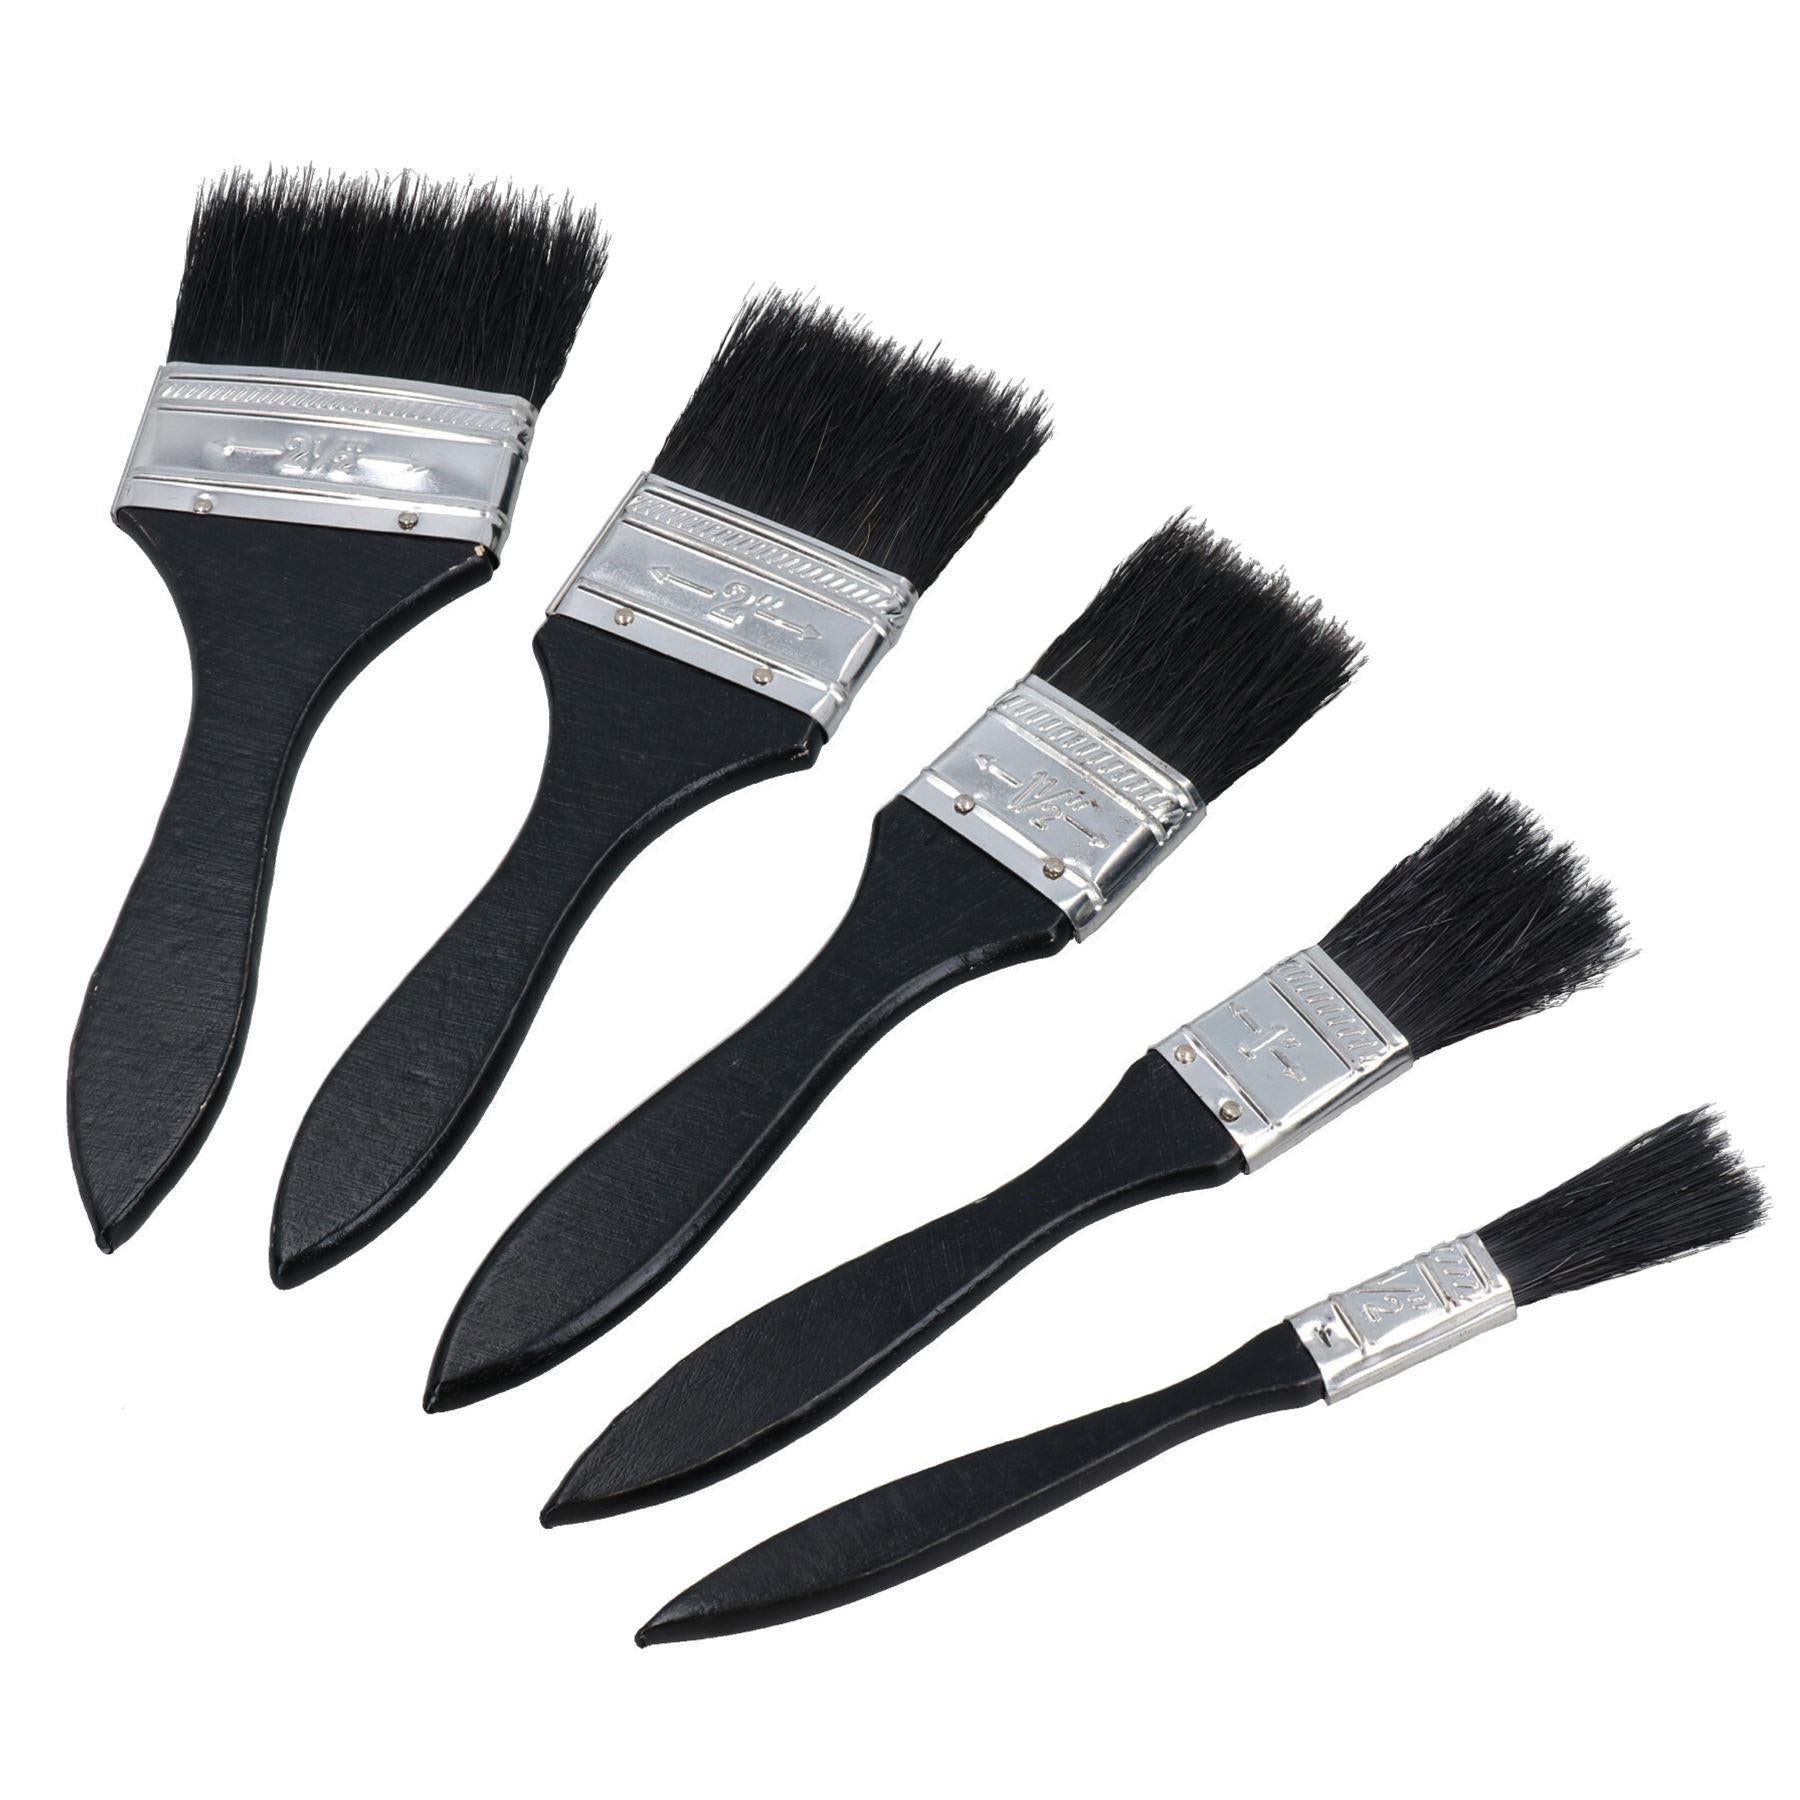 Paint Painting and Decorating Brush Set Cleaning Dusting 1/2" – 2-1/2” Wide